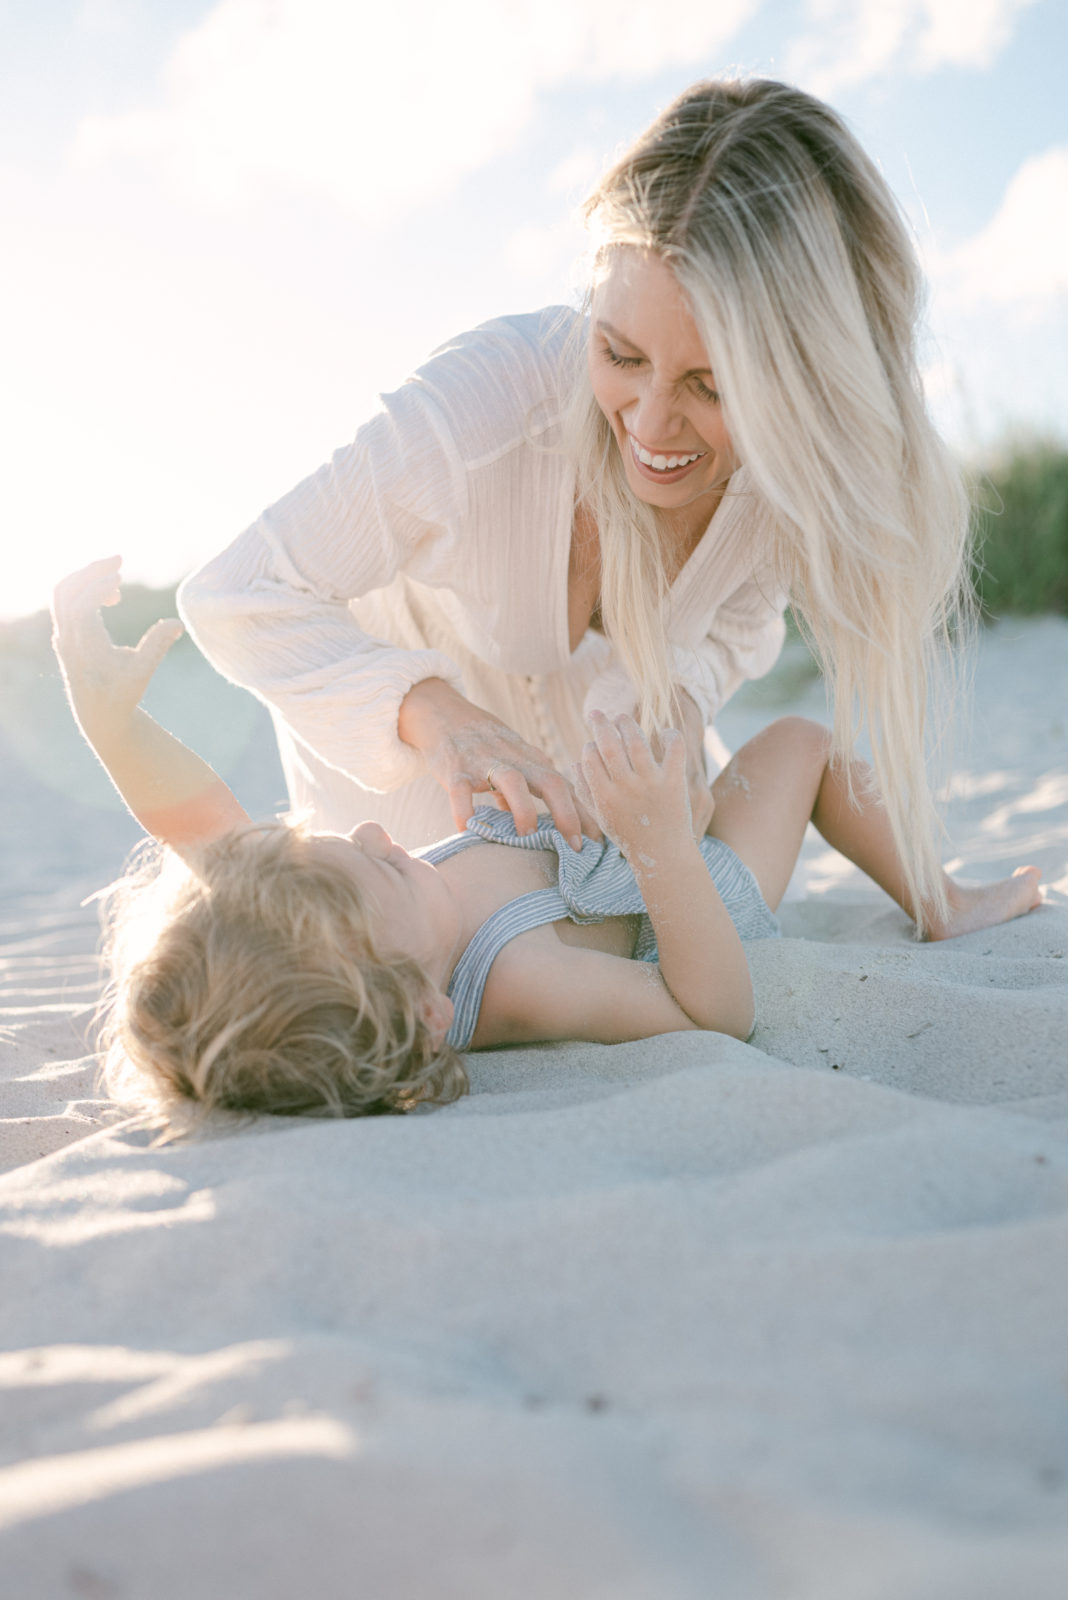 Mom tickling her son on the sand, both are having fun